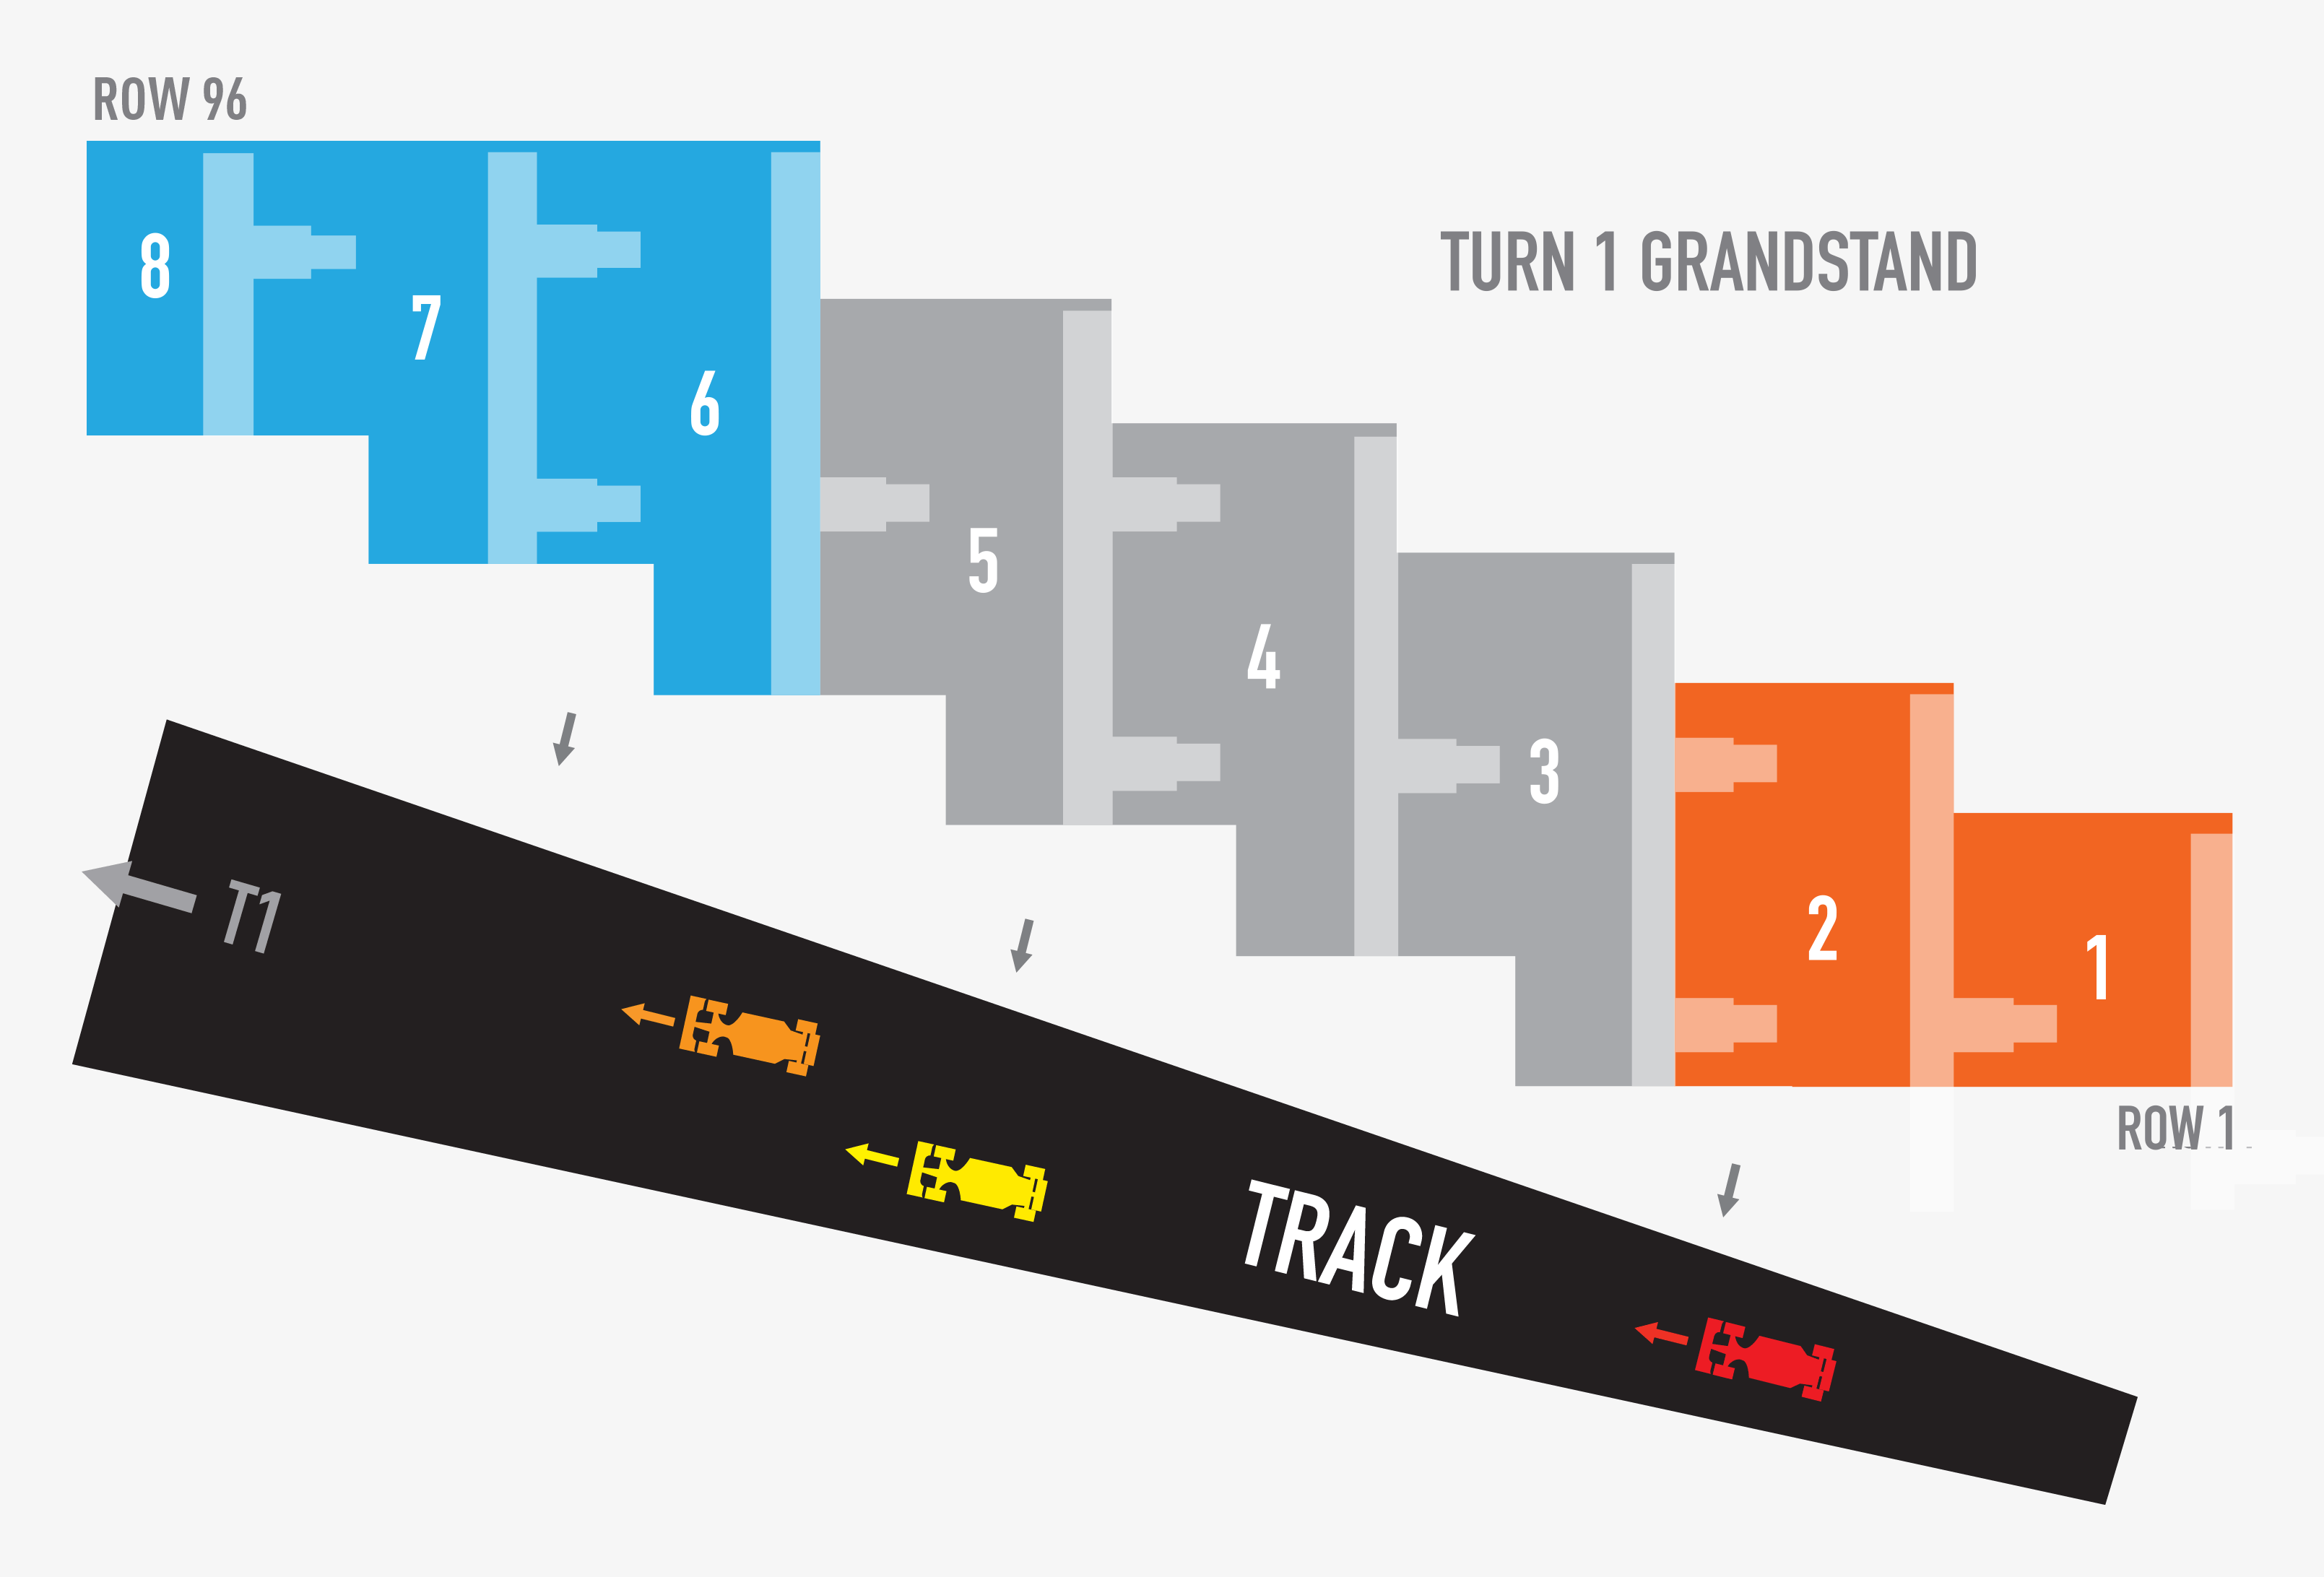 Circuit Of The Americas Seating Chart Turn 15